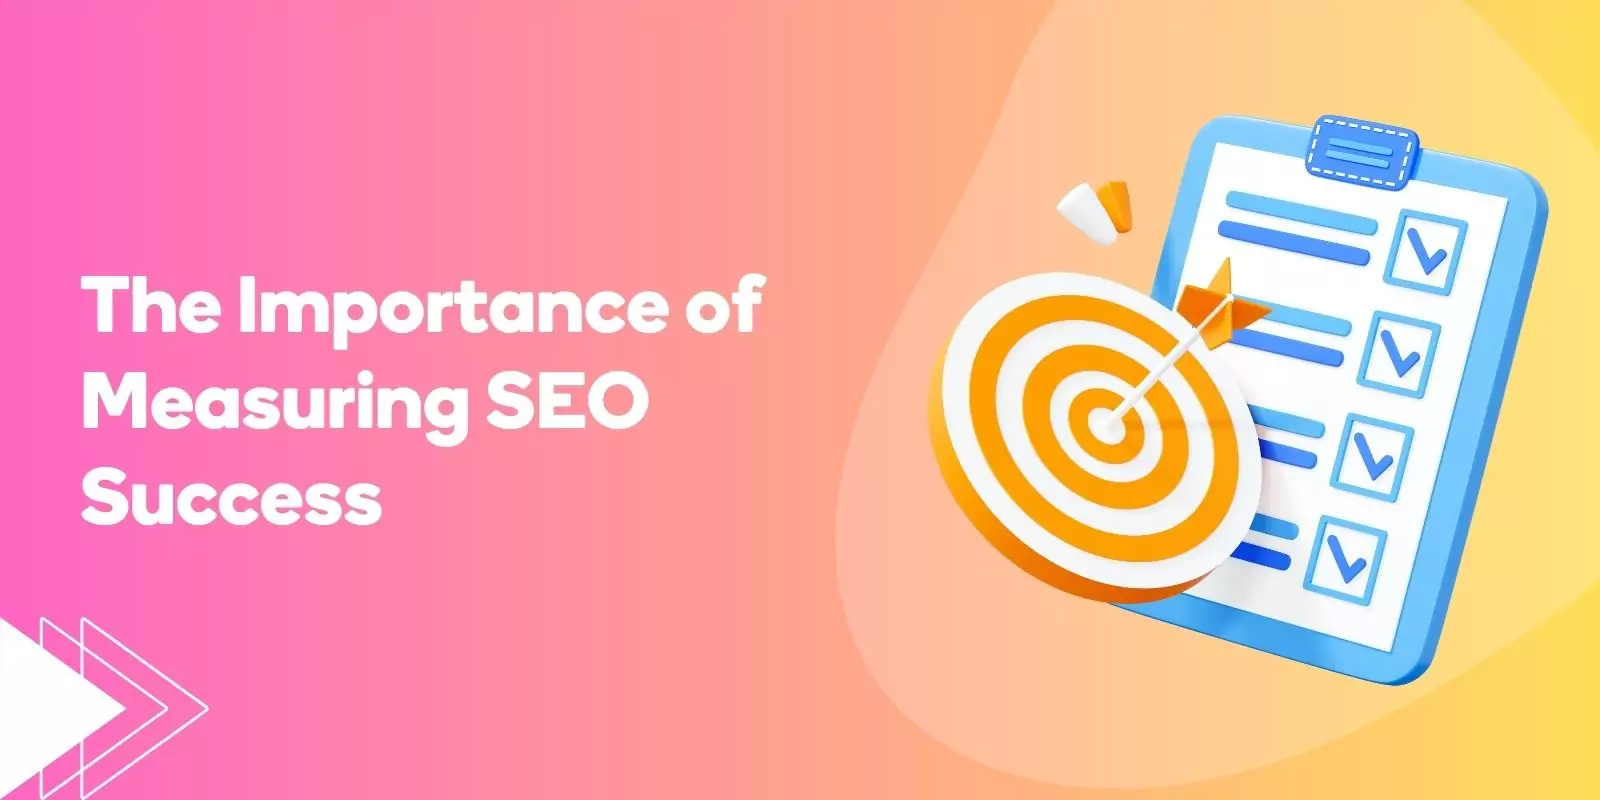 The Importance of Measuring SEO Success